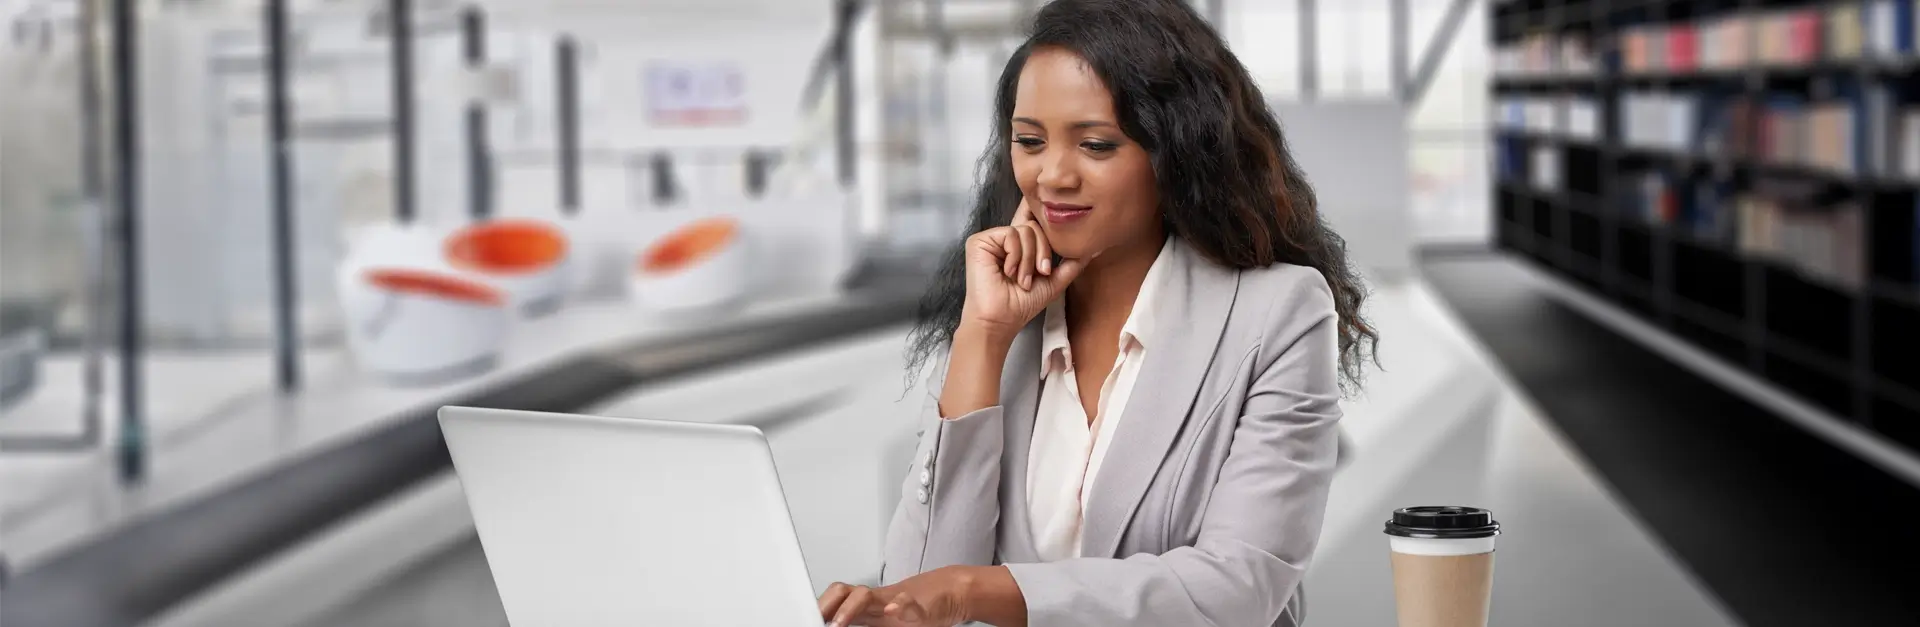 Woman in business clothing looking at computer